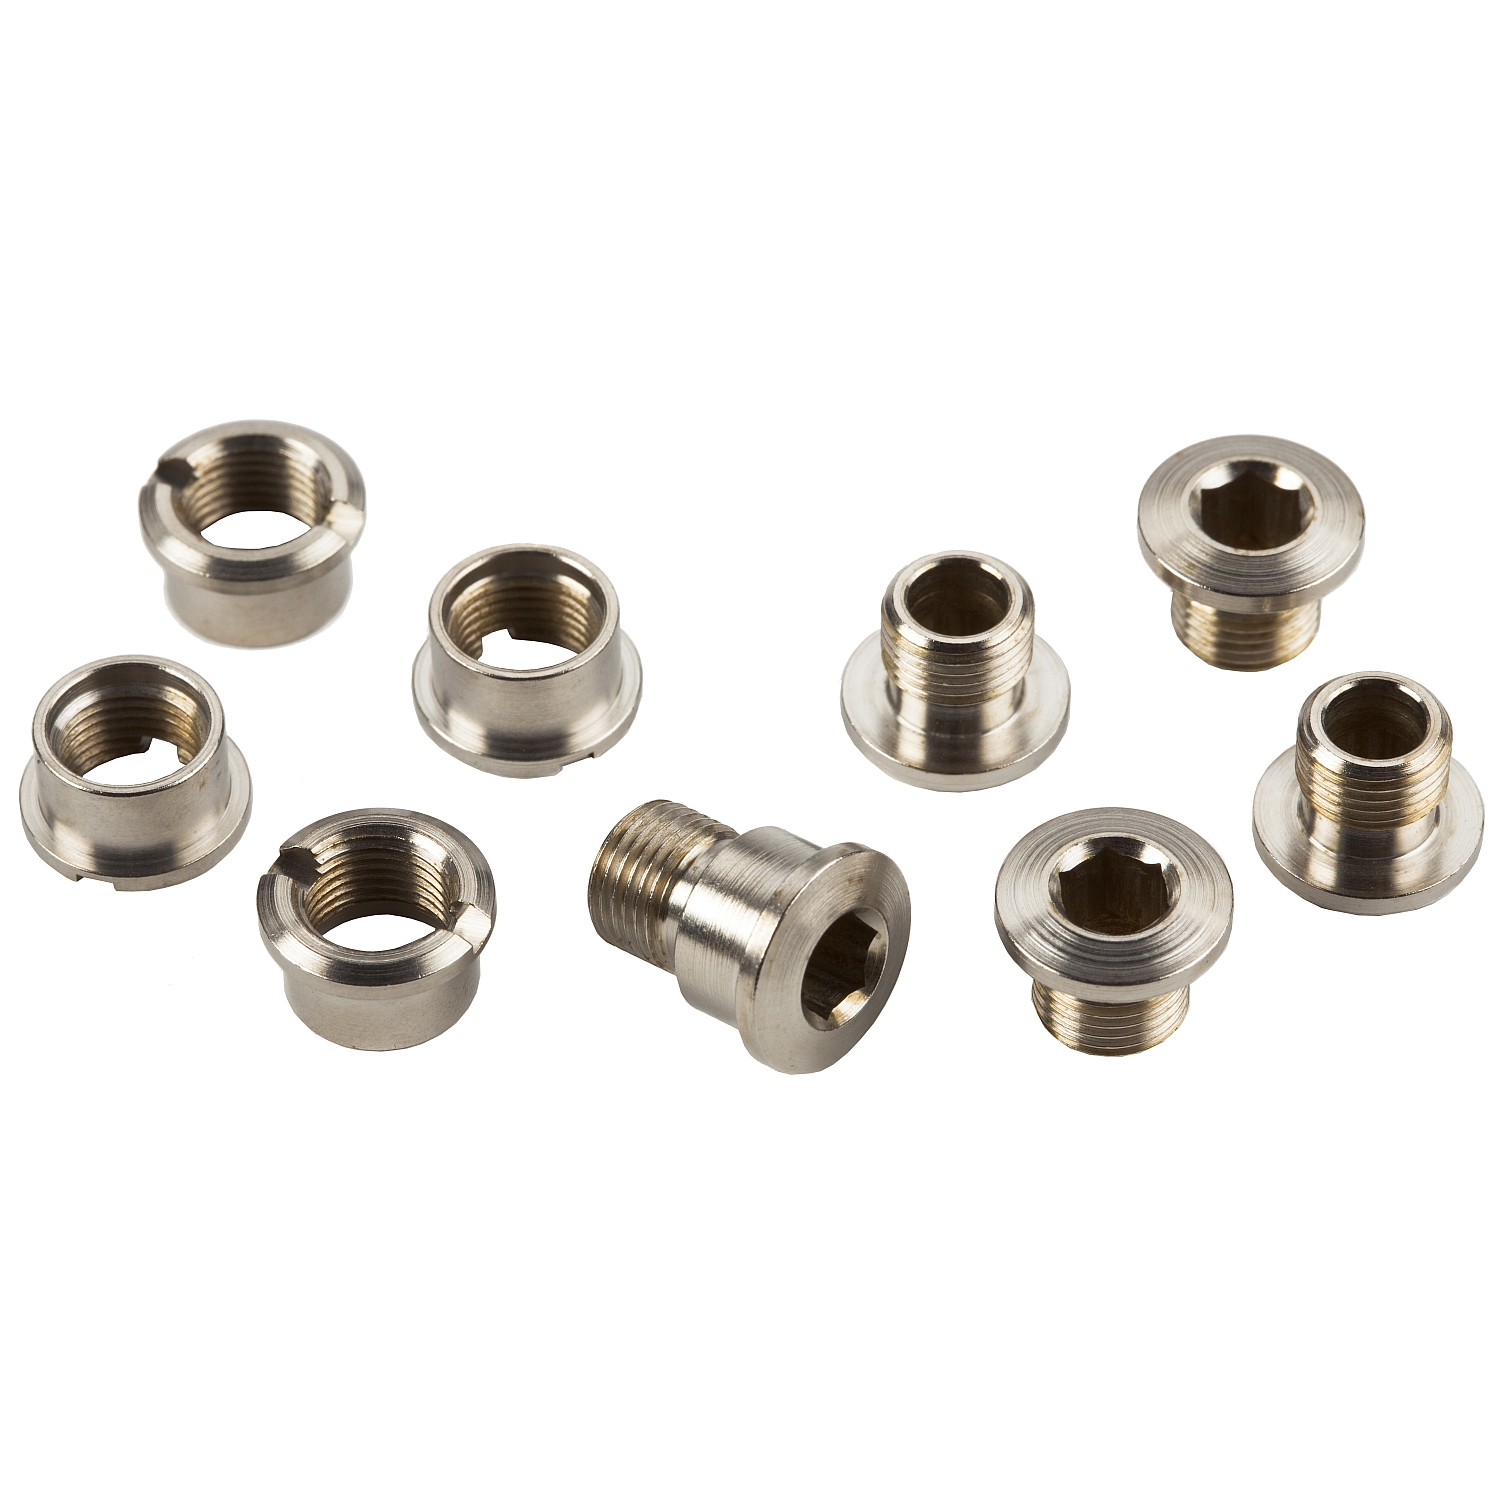 Picture of Brompton Chain Ring Bolt Set - 5 Piece